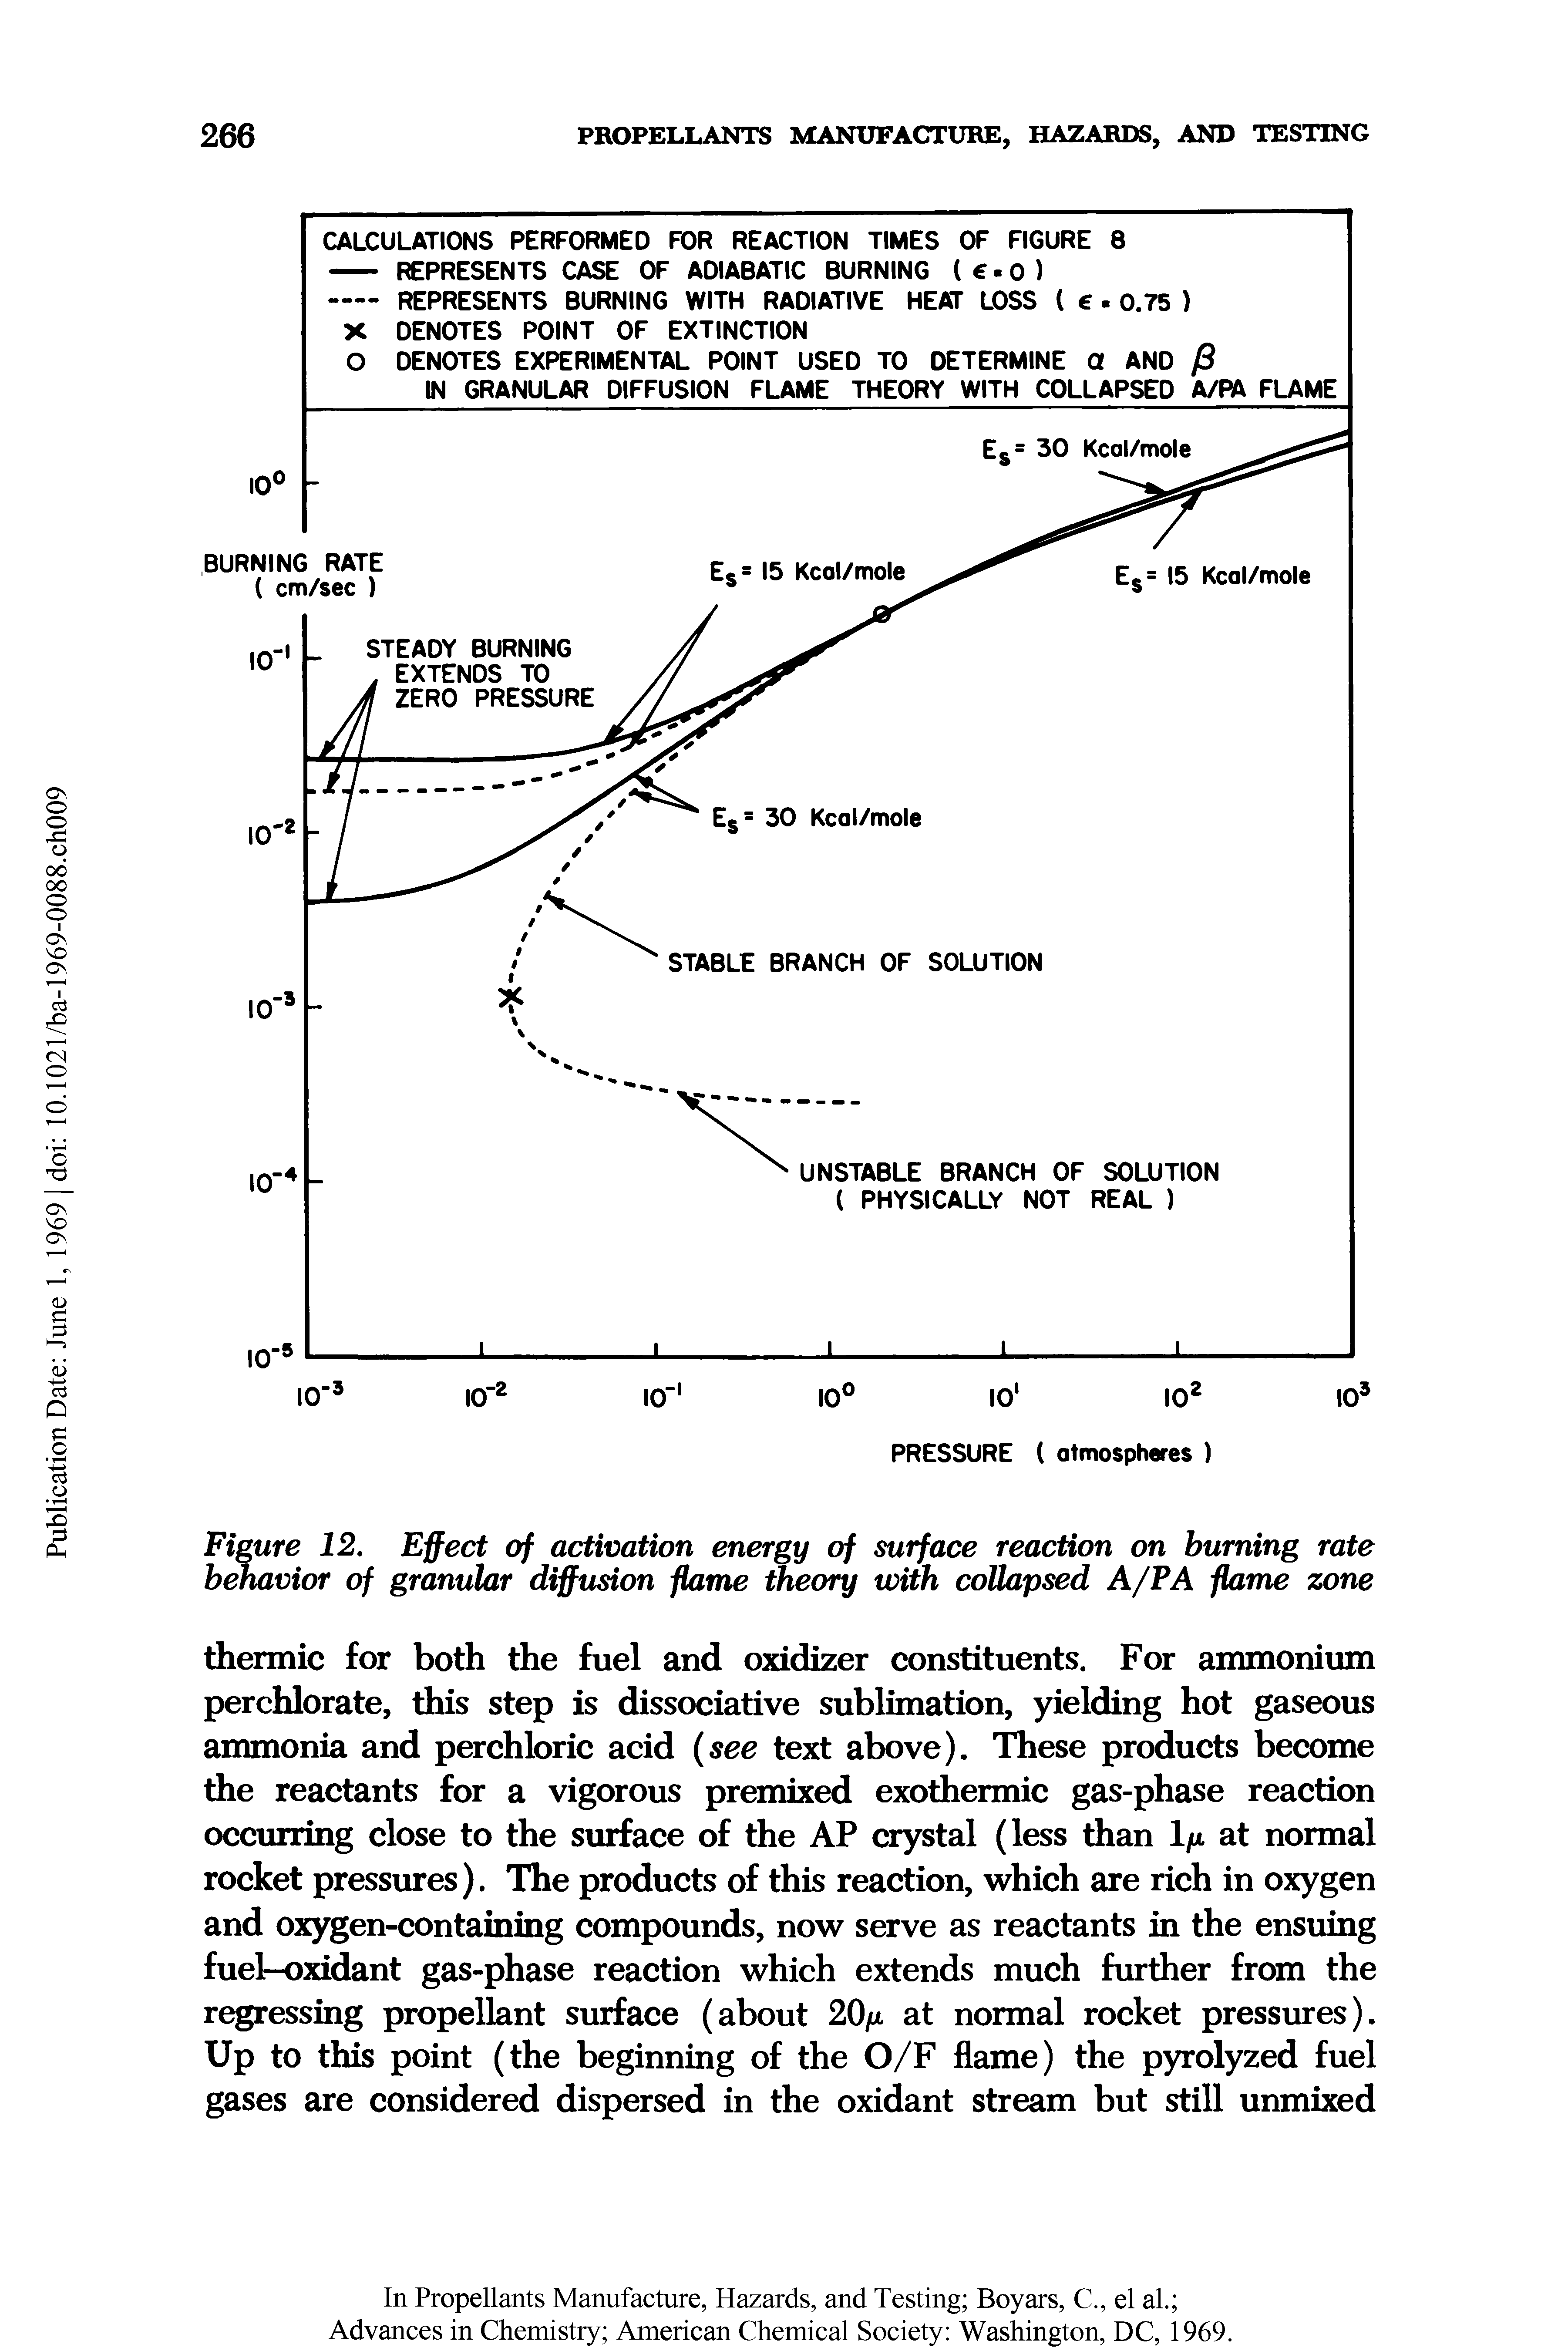 Figure 12. Effect of activation energy of surface reaction on burning rate behavior of granular diffusion flame theory with collapsed A/PA flame zone...